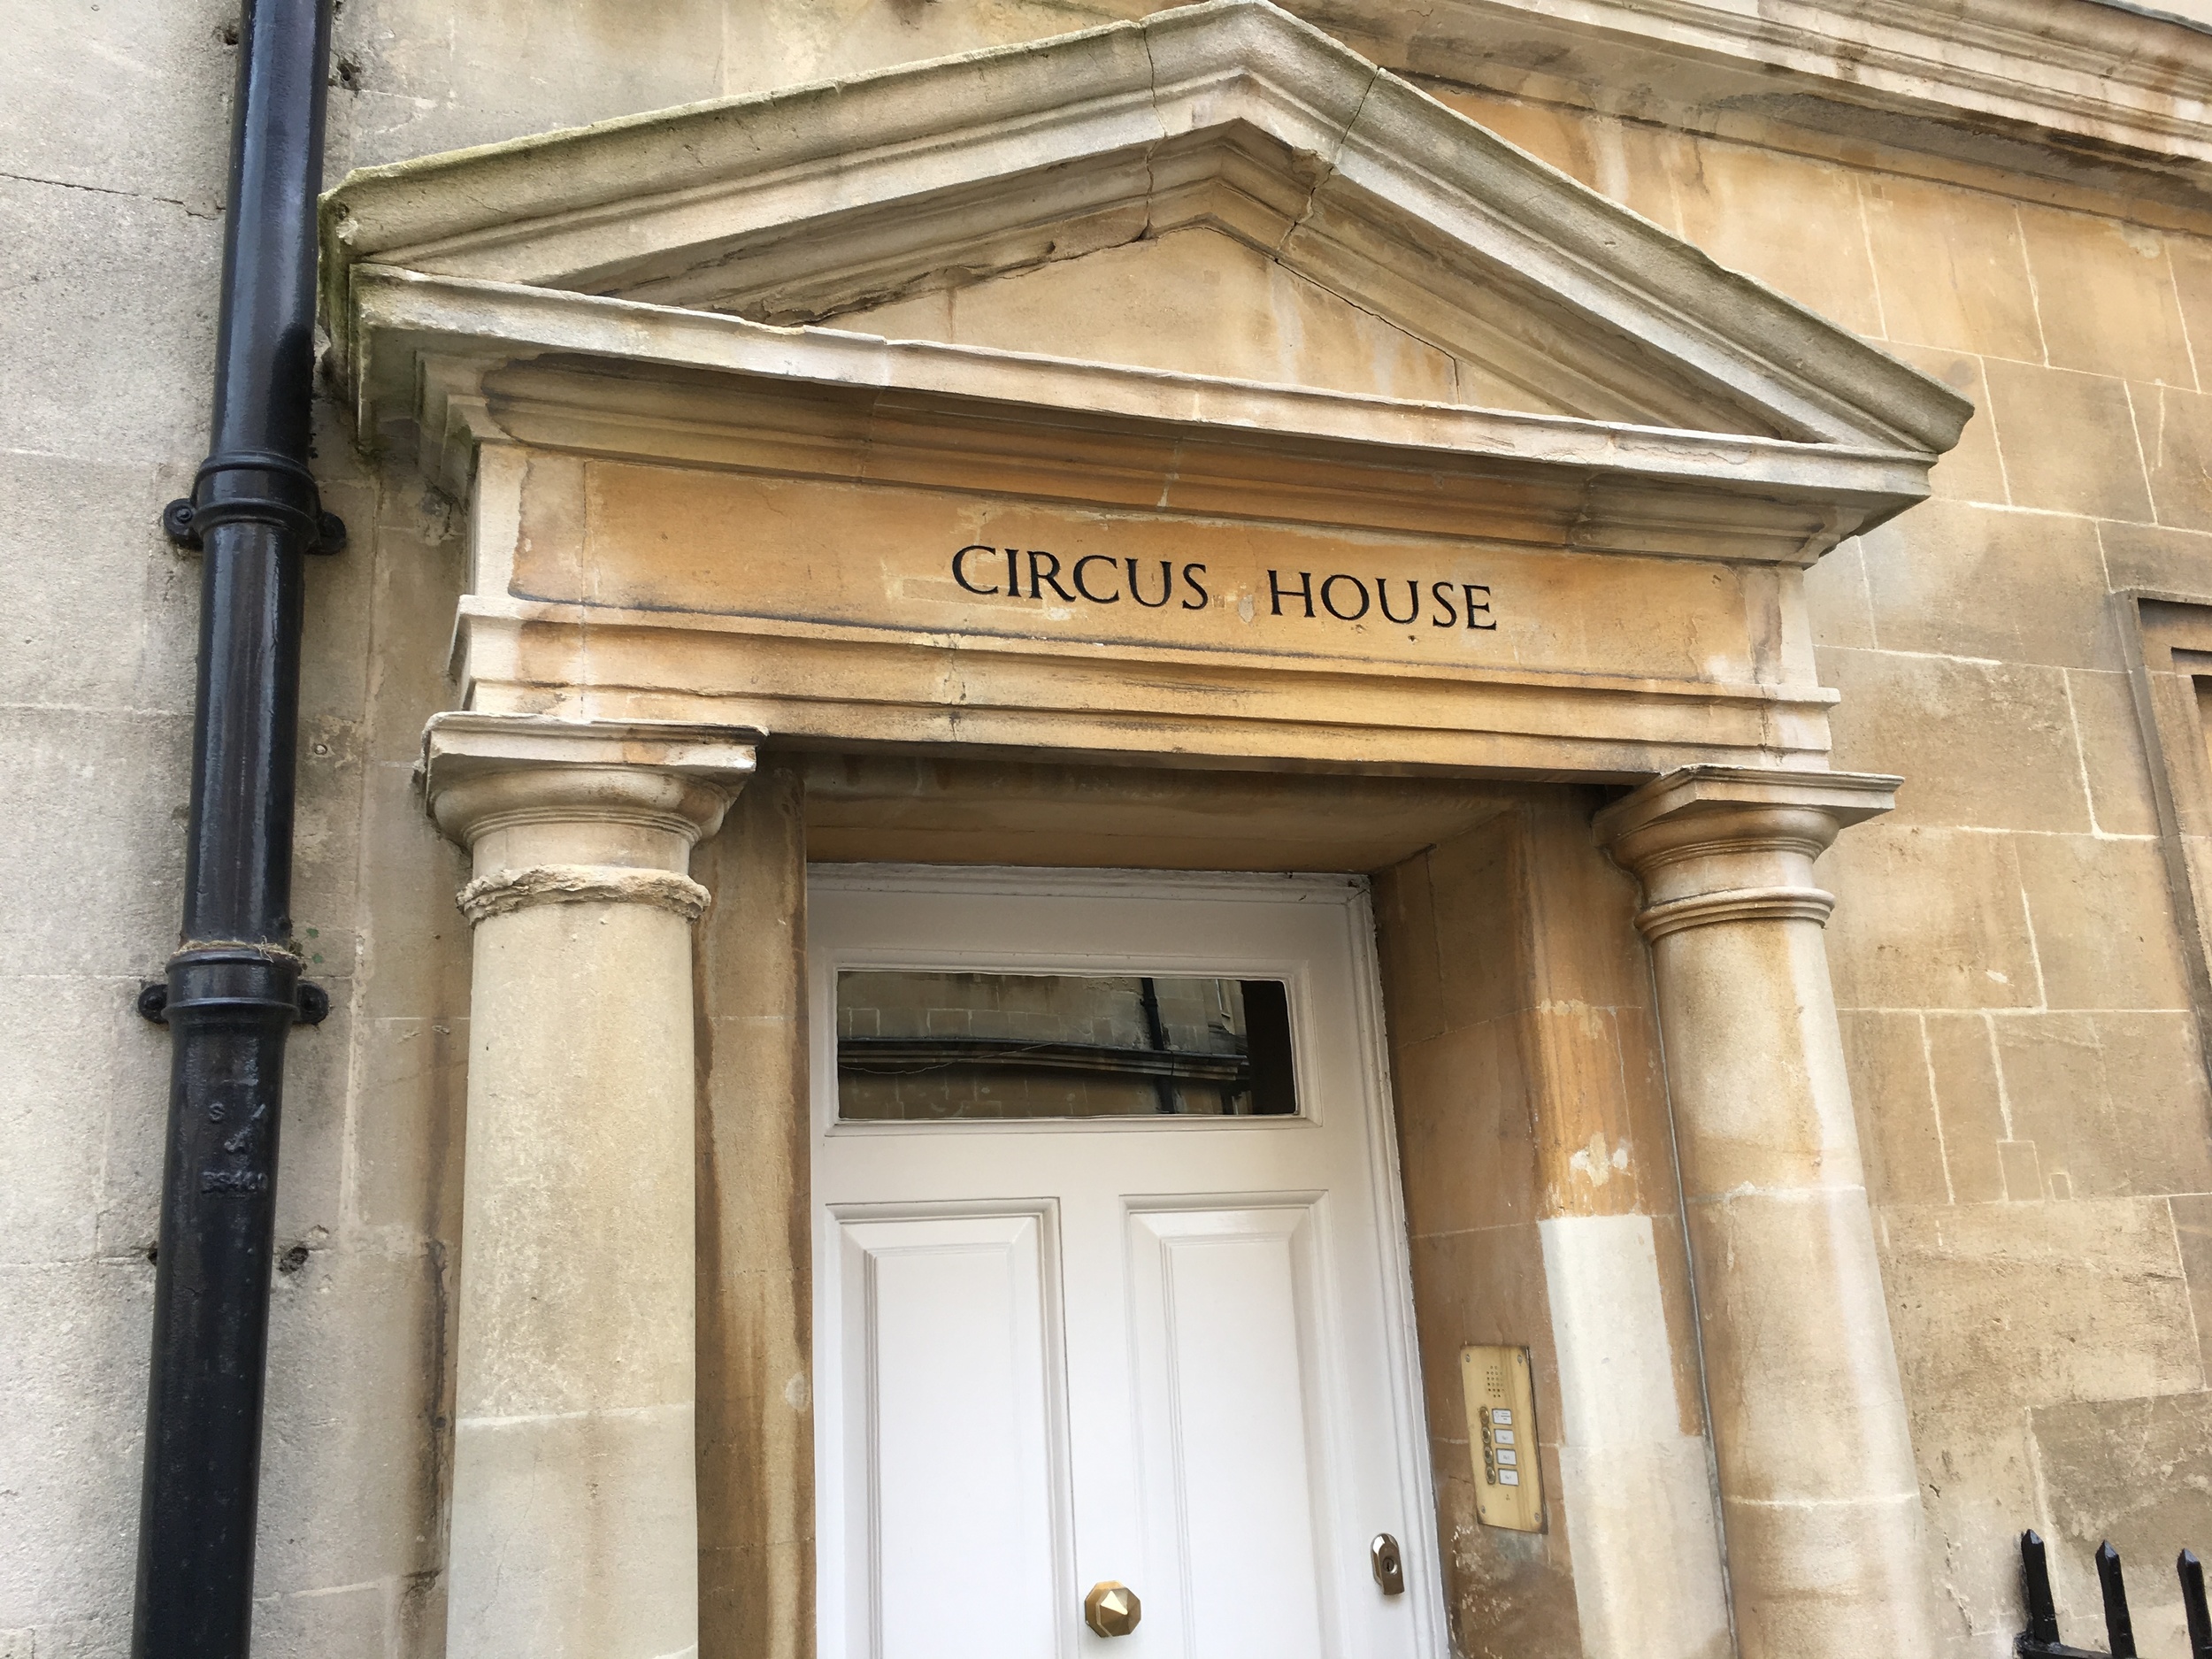  The home of a famous architect who designed many of the buildings in Bath. 